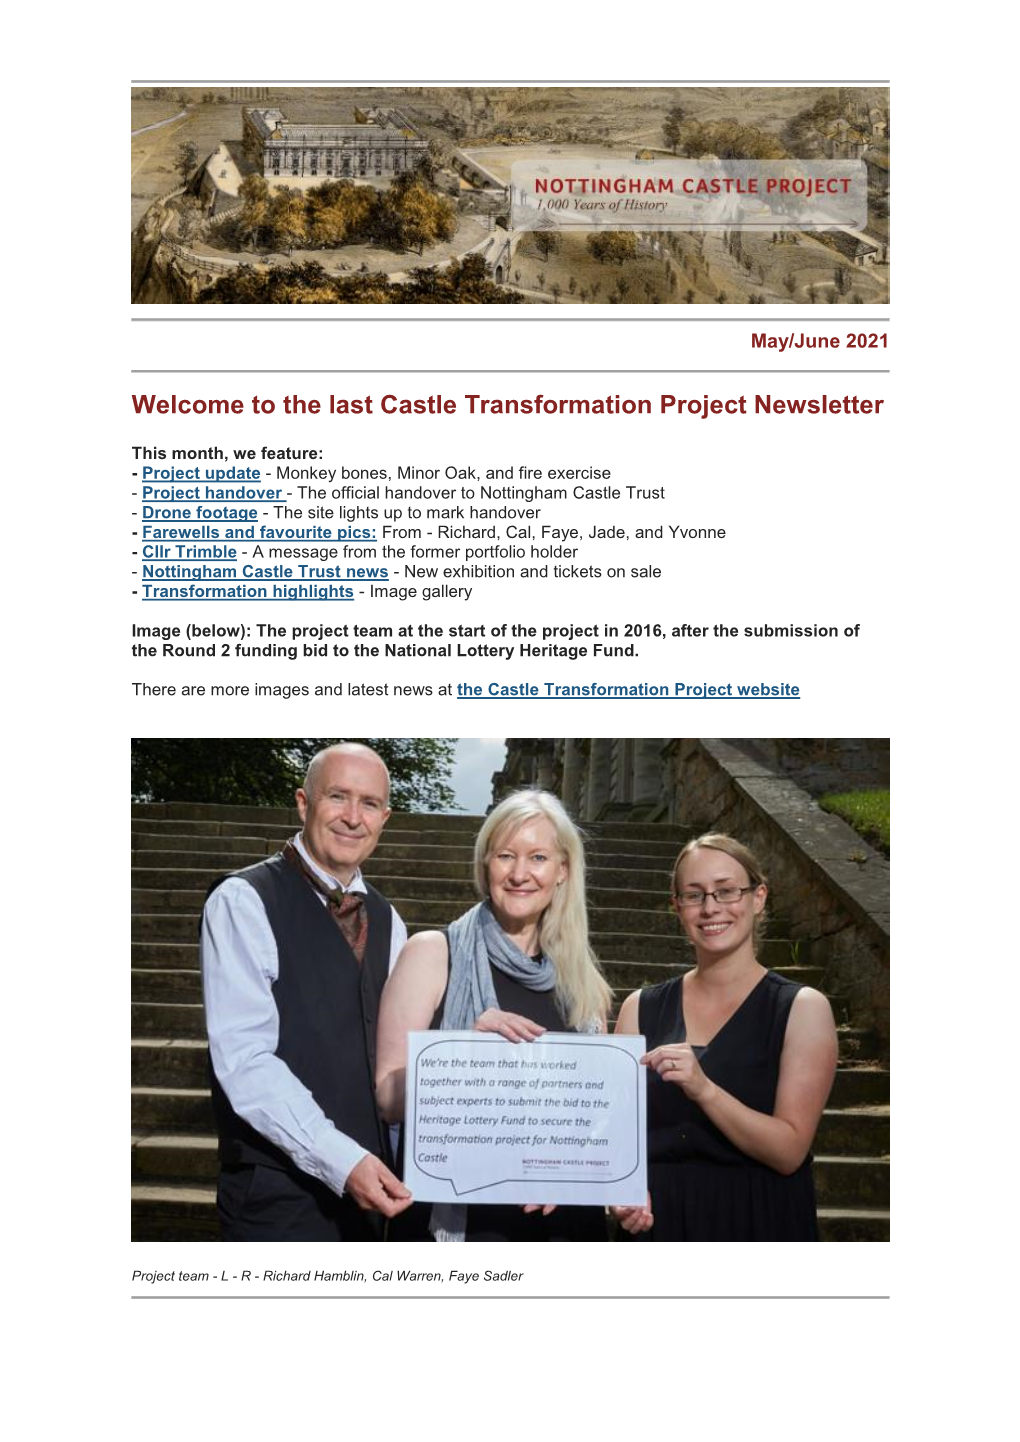 The Last Castle Transformation Project Newsletter